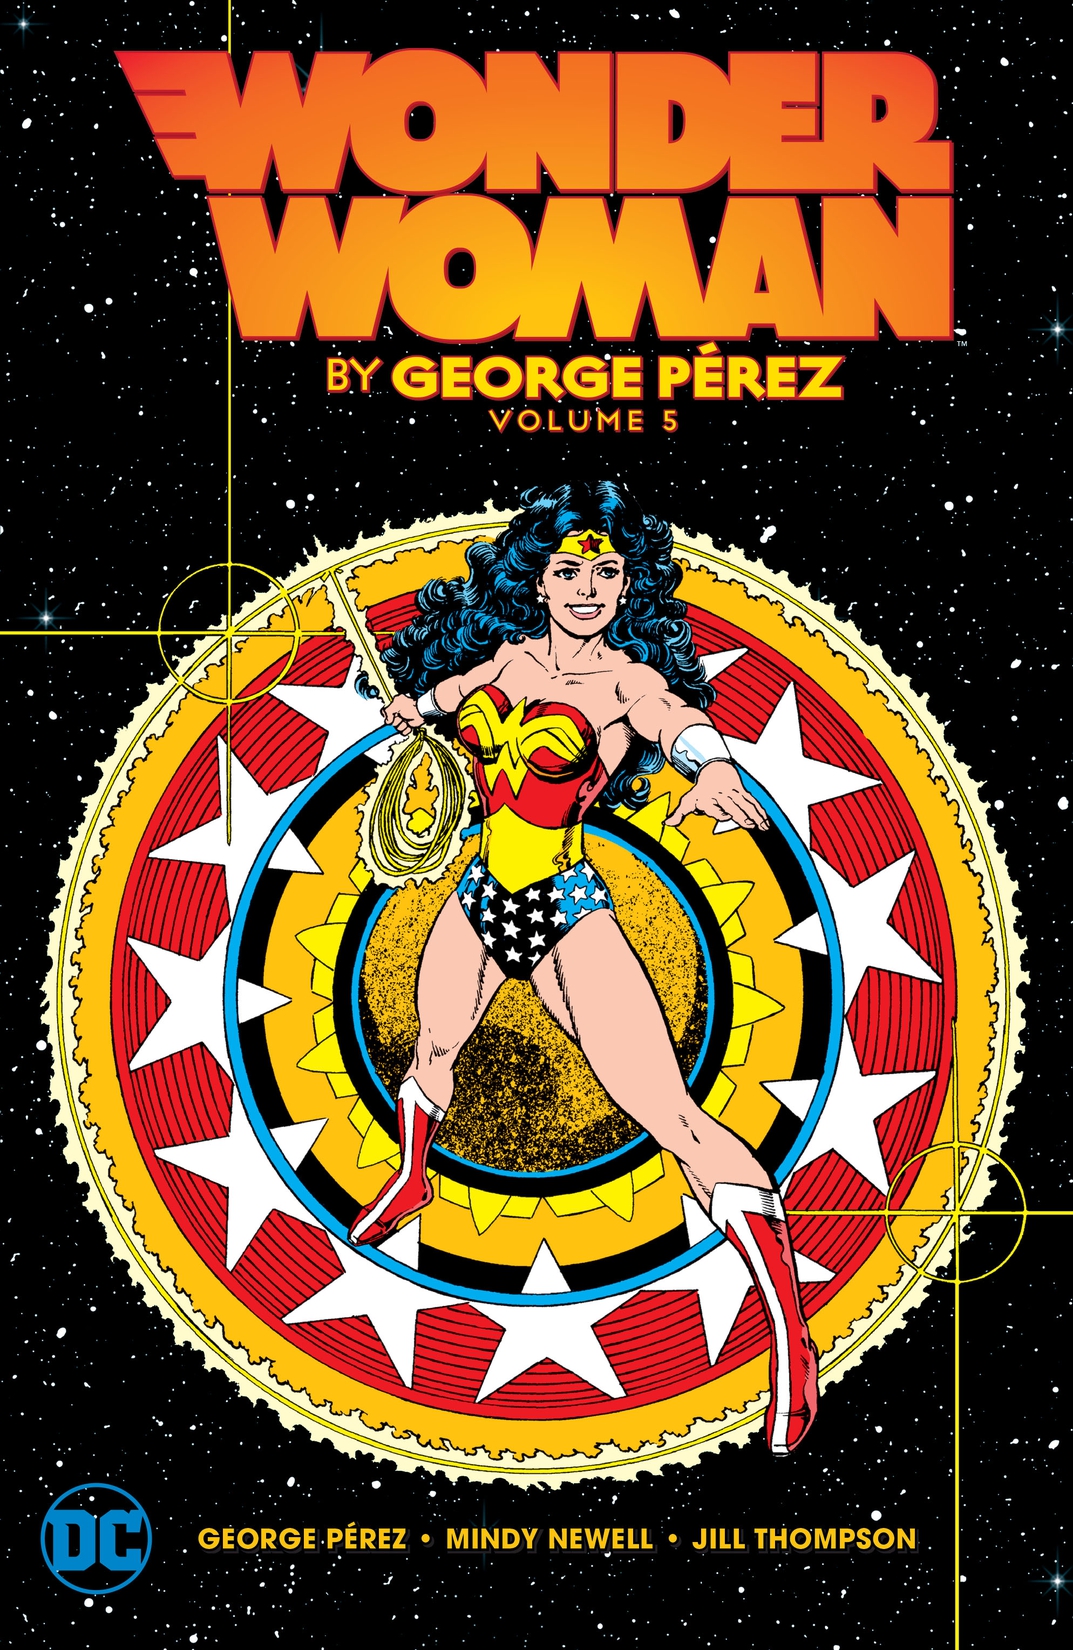 Wonder Woman by George Perez Vol. 5 preview images